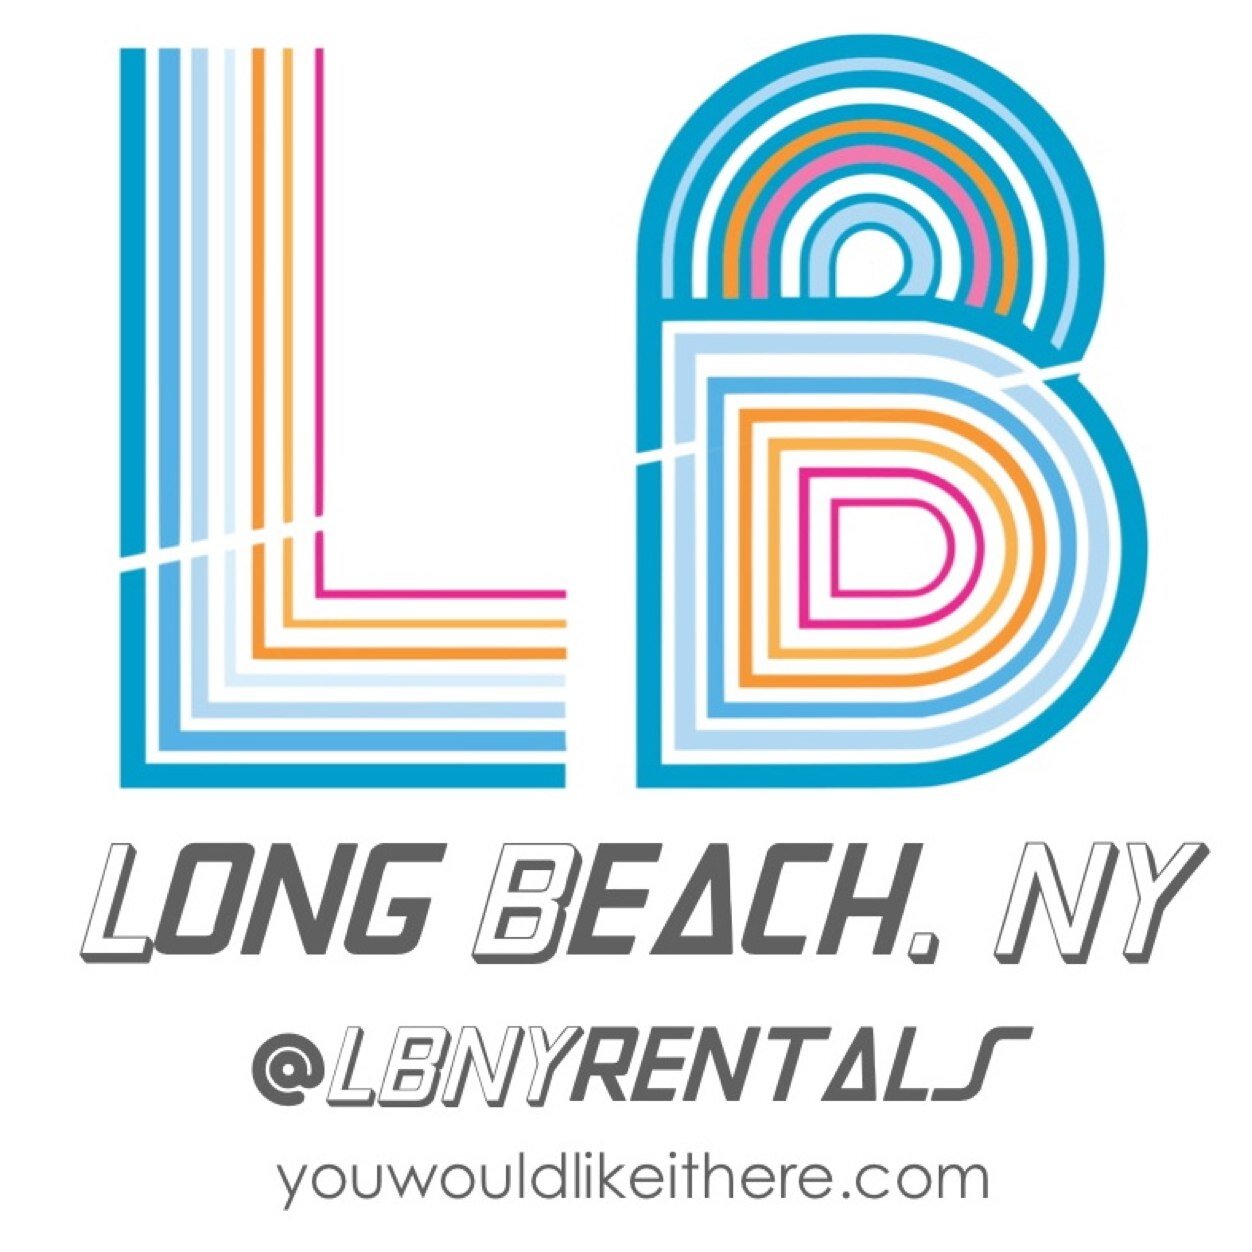 Listing the finest apartments that Long Beach has to offer. Call Katherine 516-297-5652 to schedule an appointment.